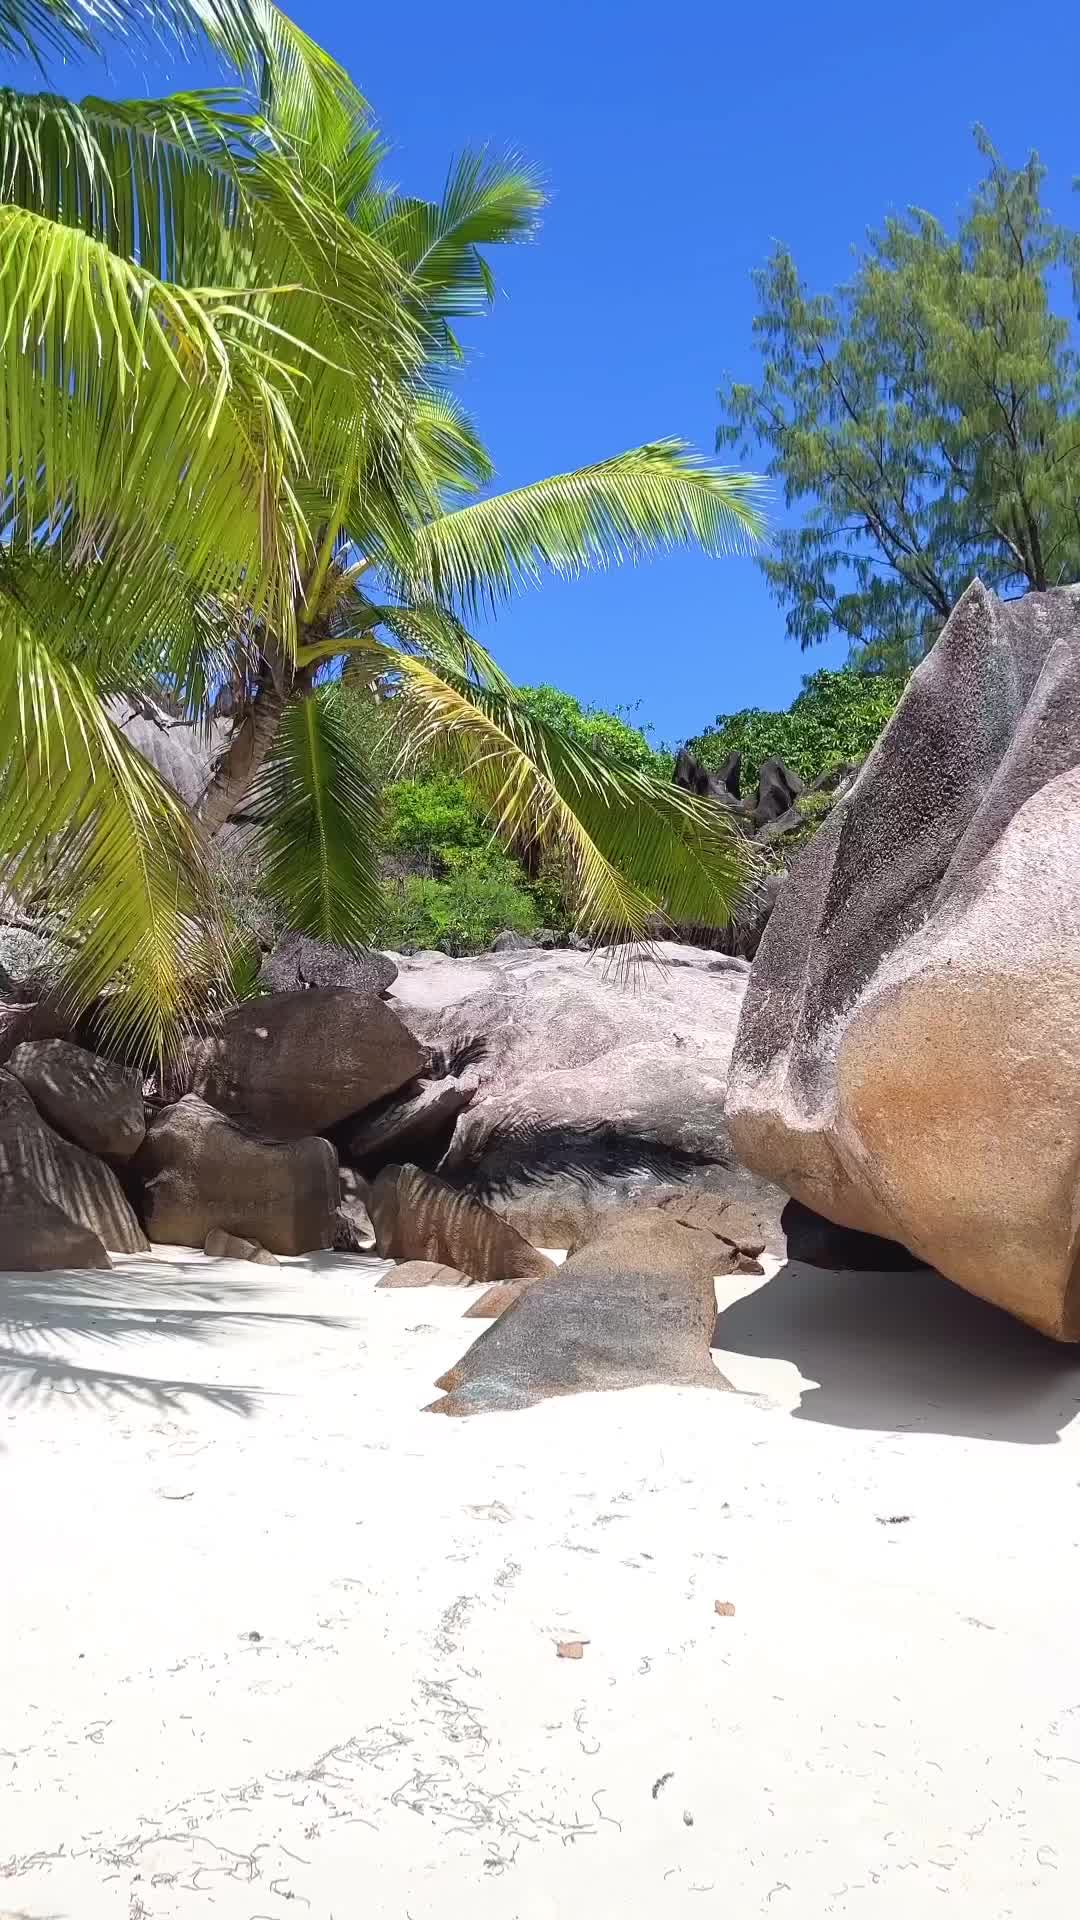 Discover the Beauty of Seychelles Islands